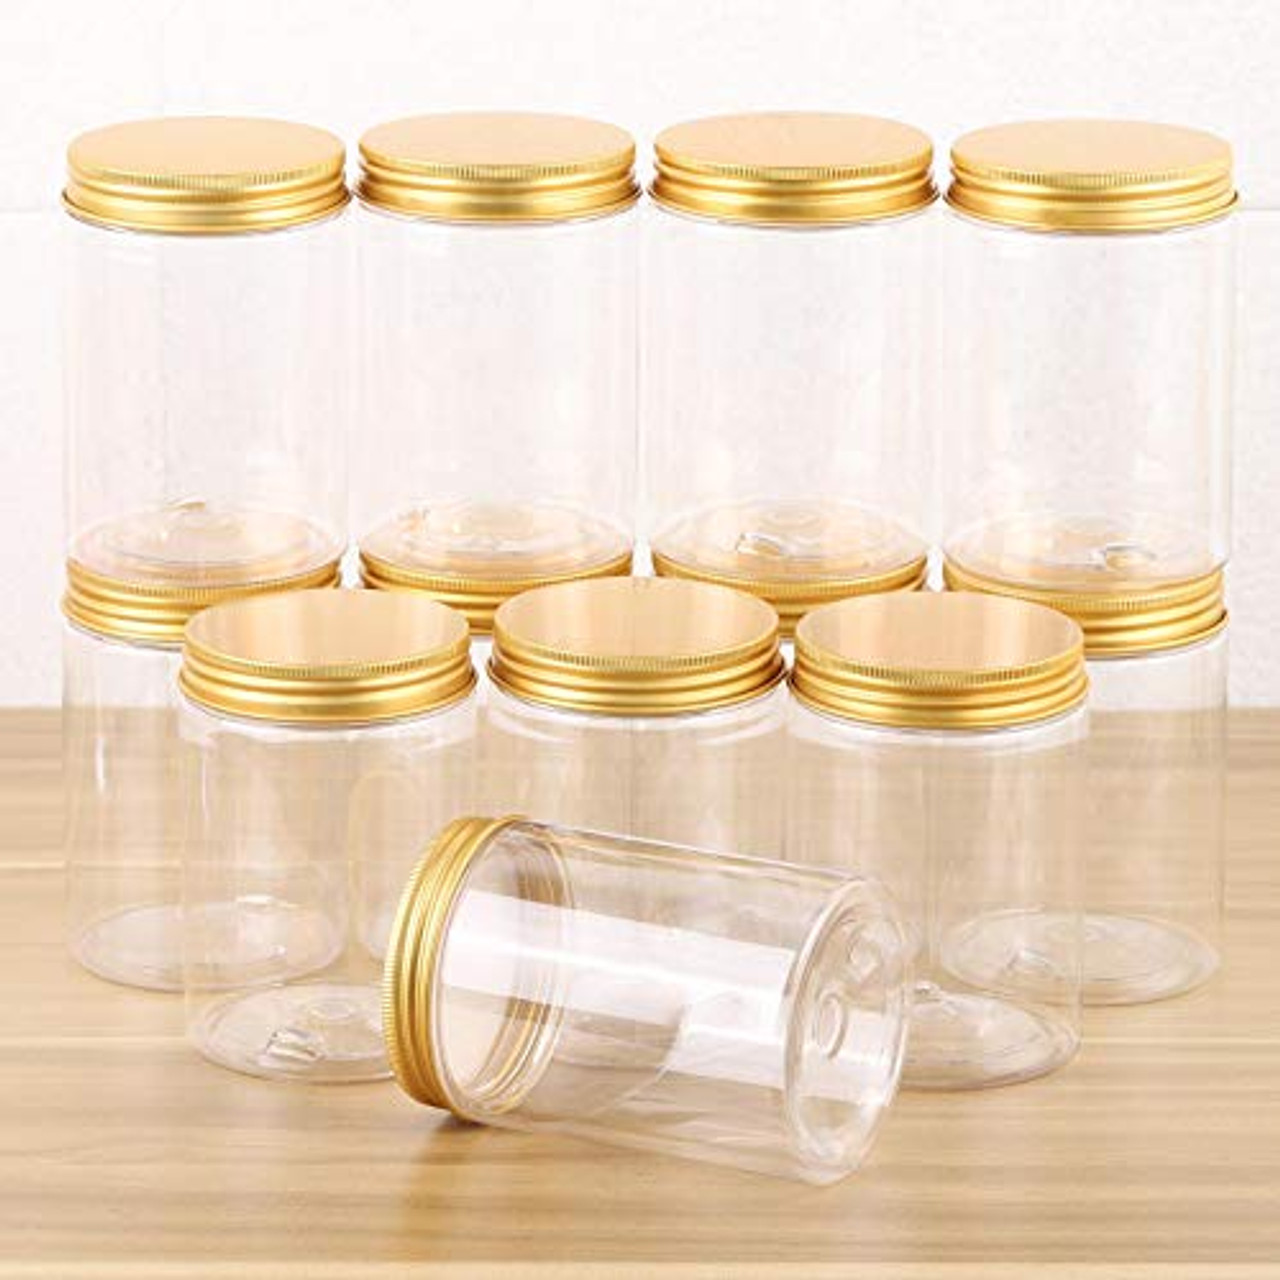 12-Pack 280ml Clear Plastic Slime Jars with Lids, Refillable Empty